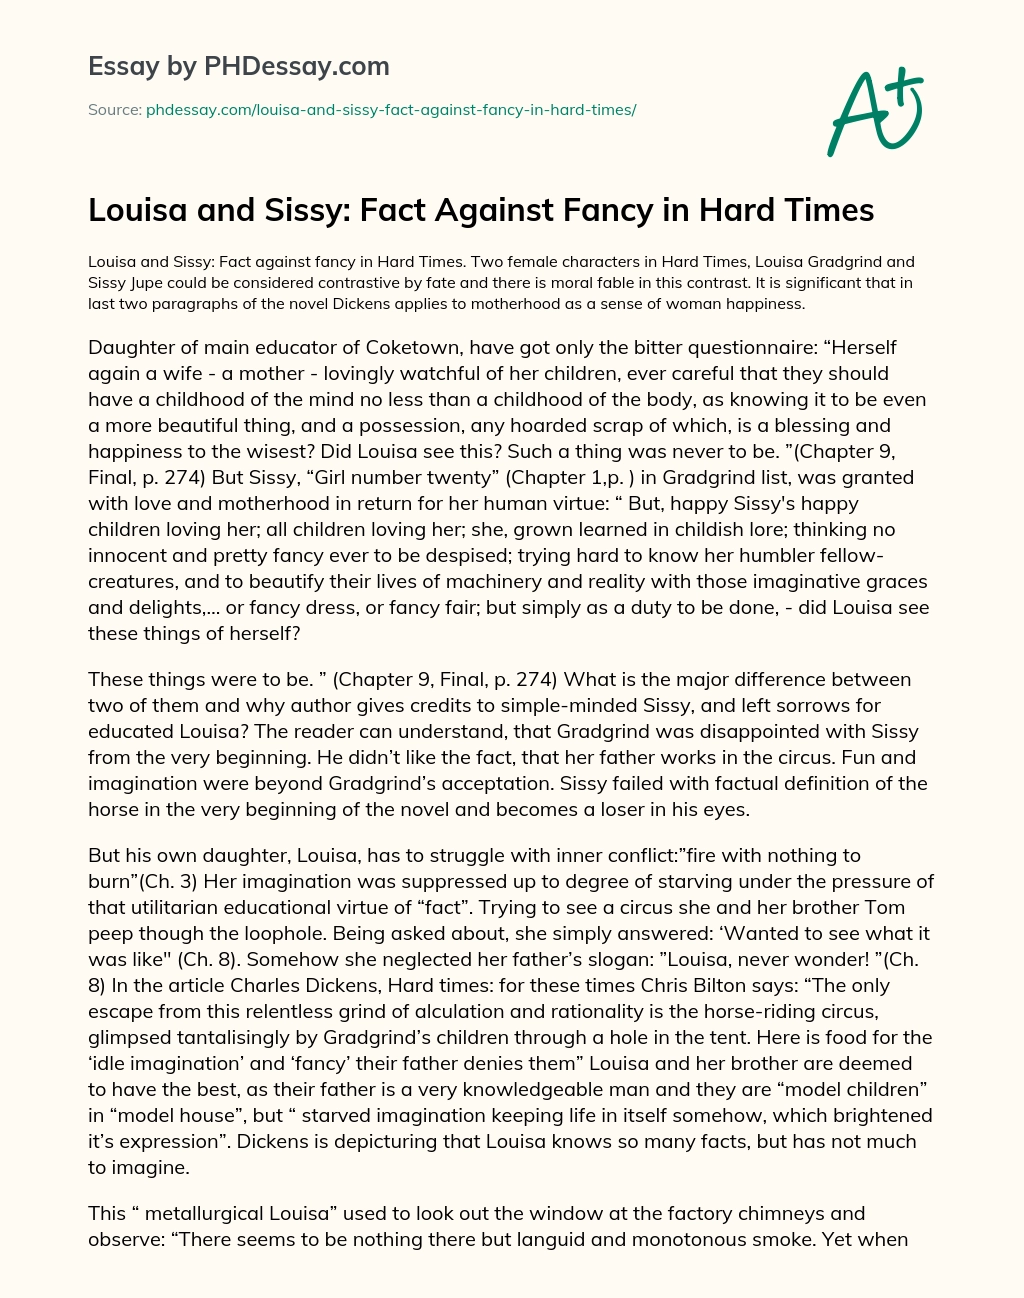 Louisa and Sissy: Fact Against Fancy in Hard Times essay